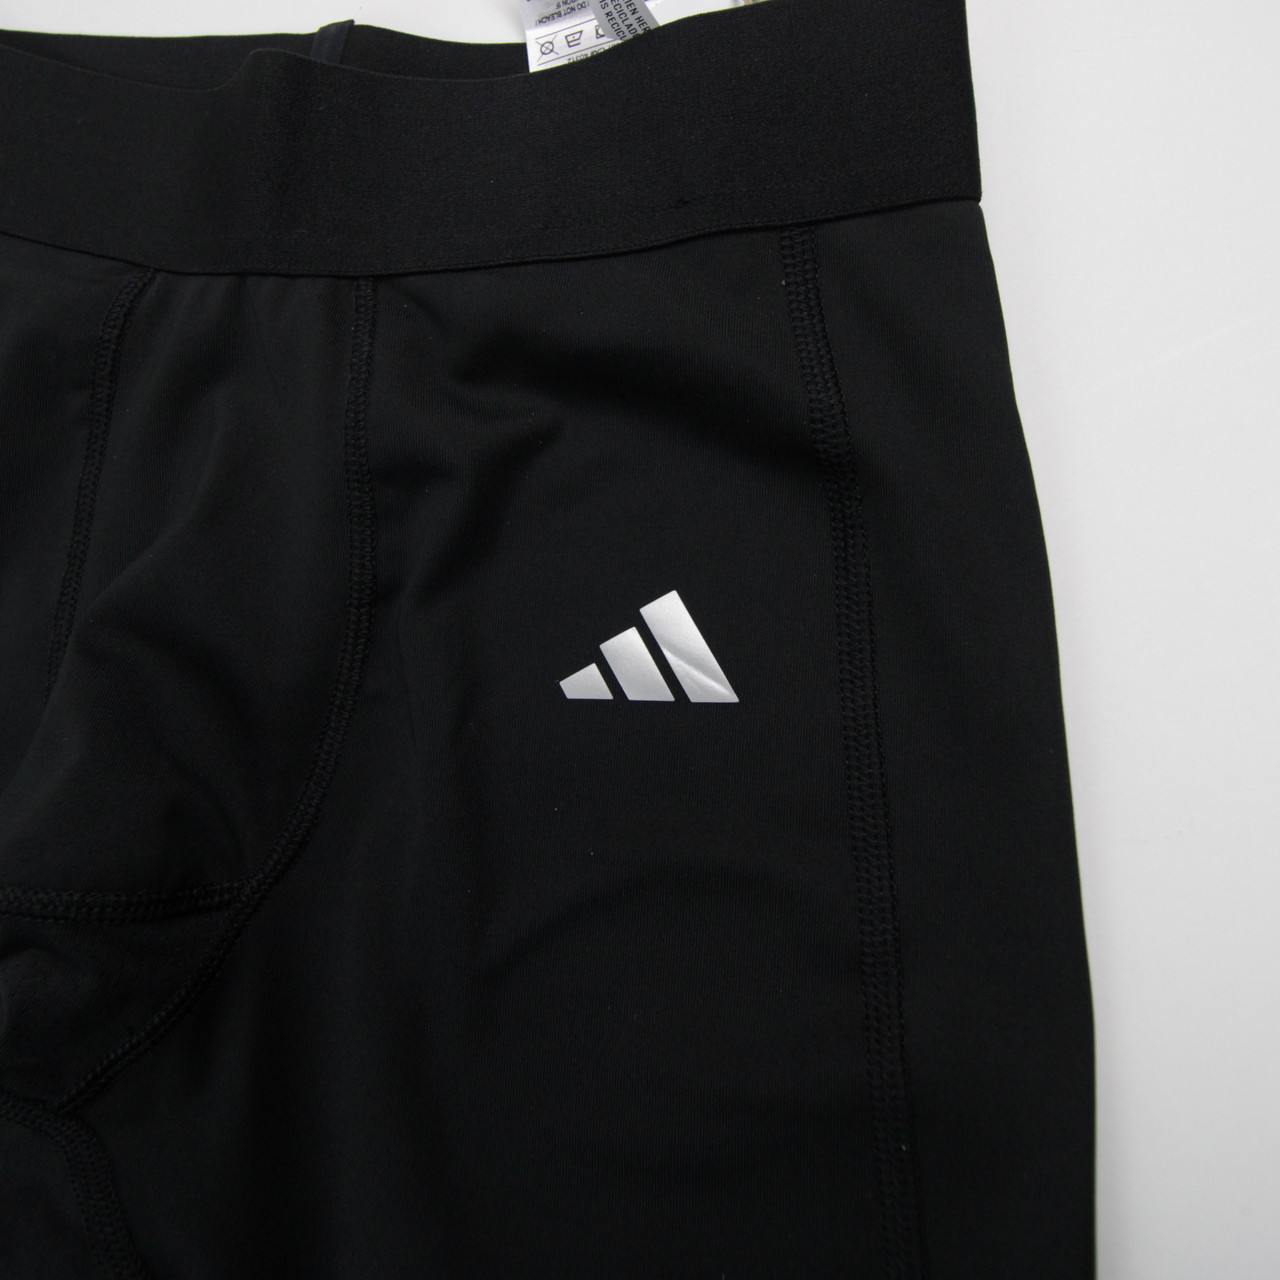 adidas Techfit Compression Pants Men's Black New with Tags S 534